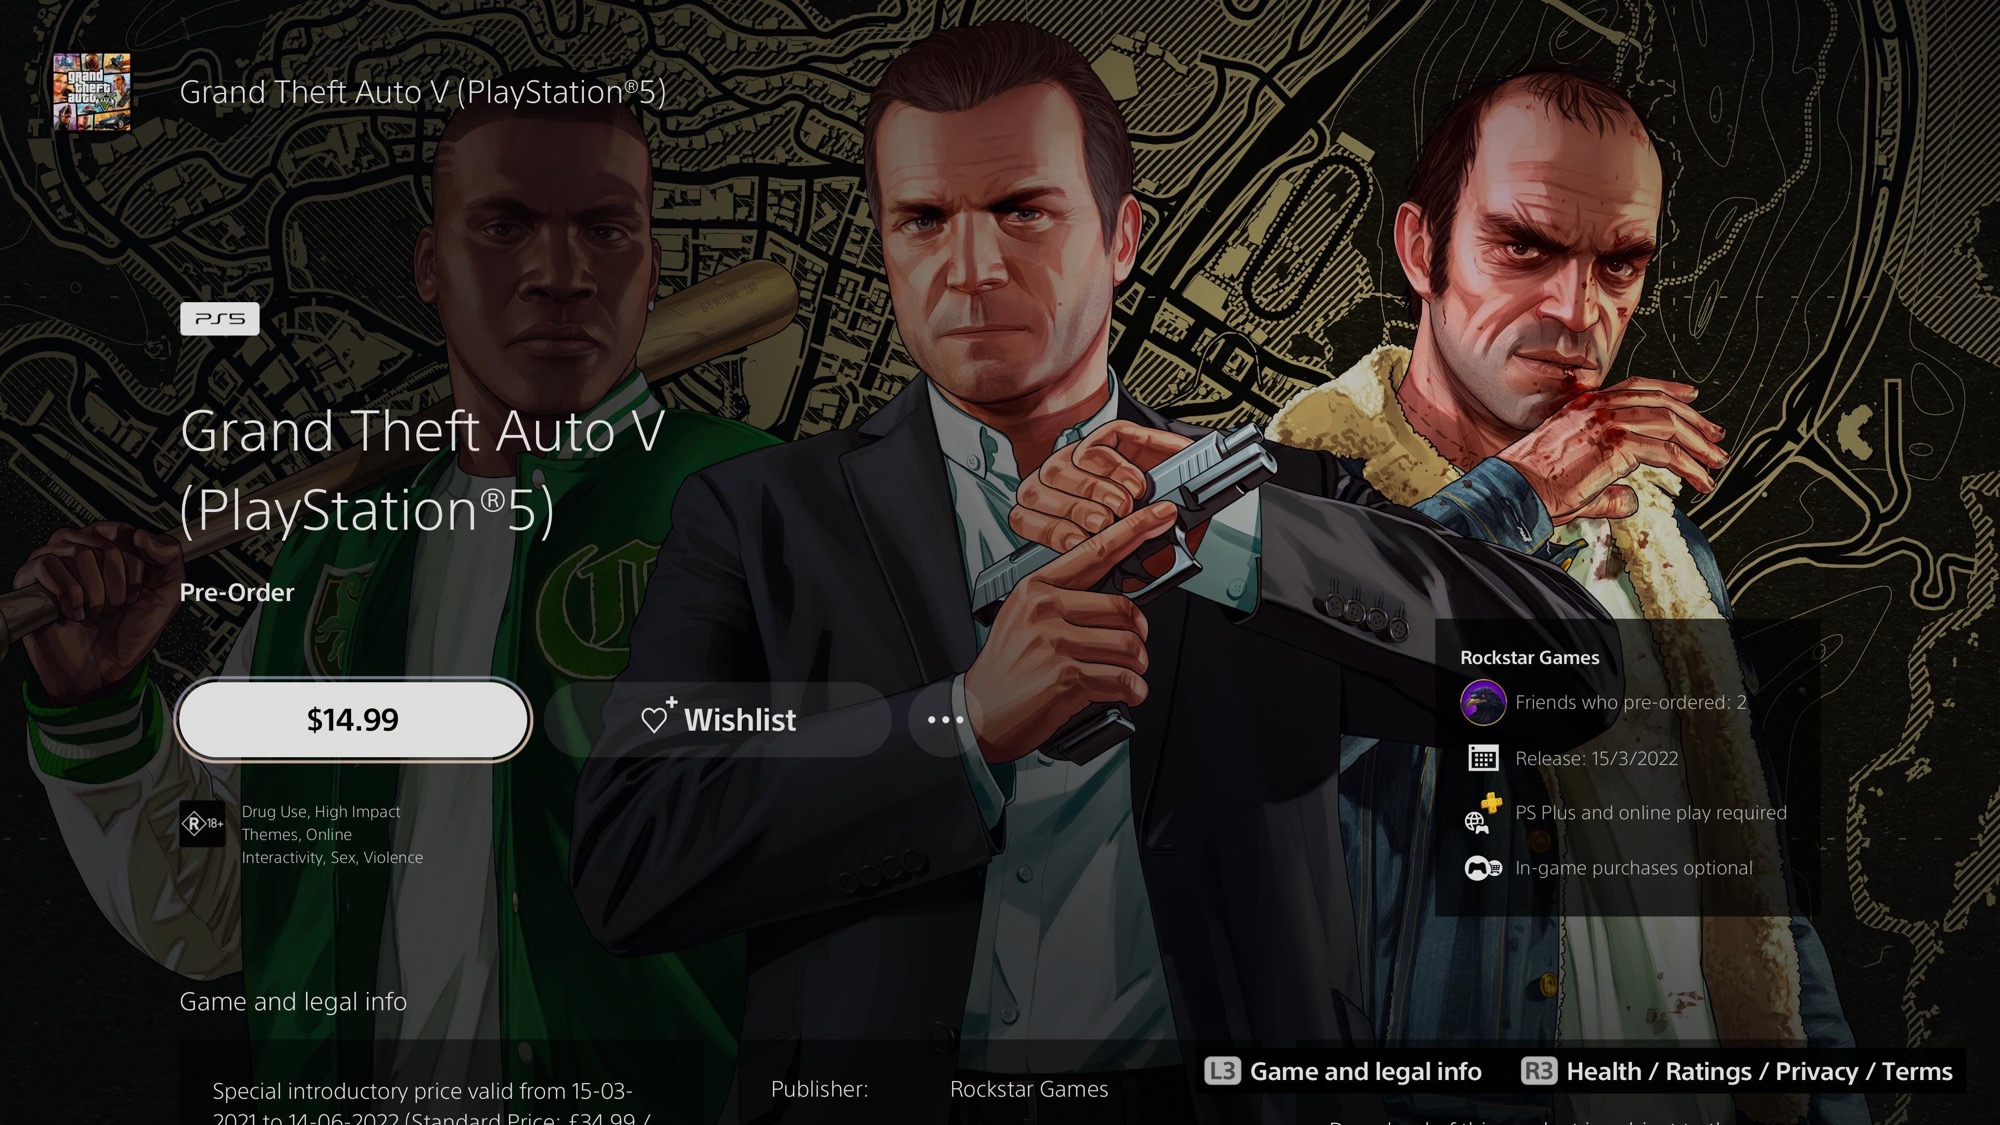 GTA5 PS5 Price Revealed, Will Cost $10 Until June, $20 After GTA